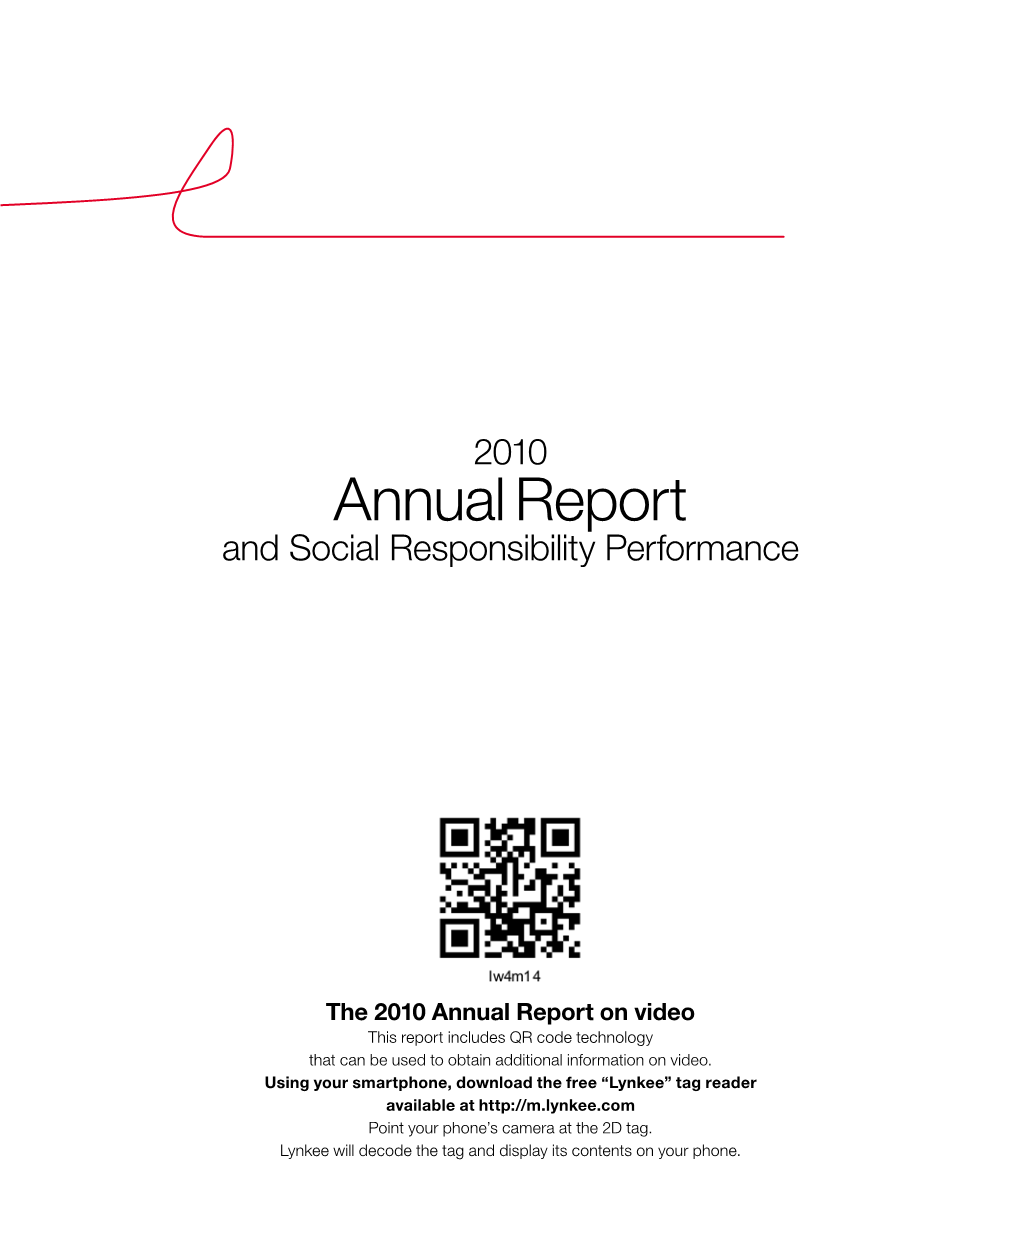 2010 Annual Report and Social Responsibility Performance